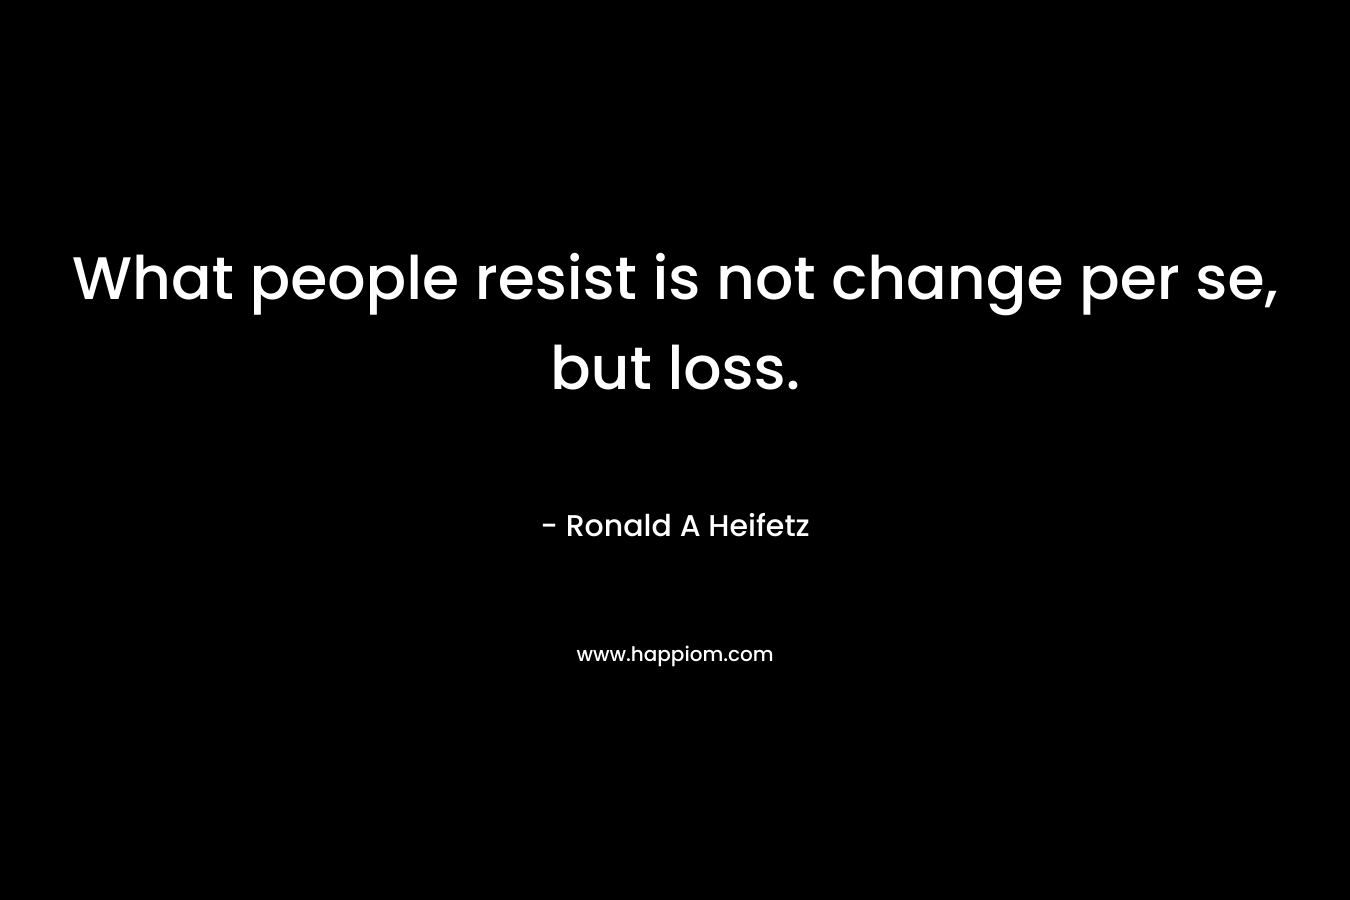 What people resist is not change per se, but loss. – Ronald A Heifetz